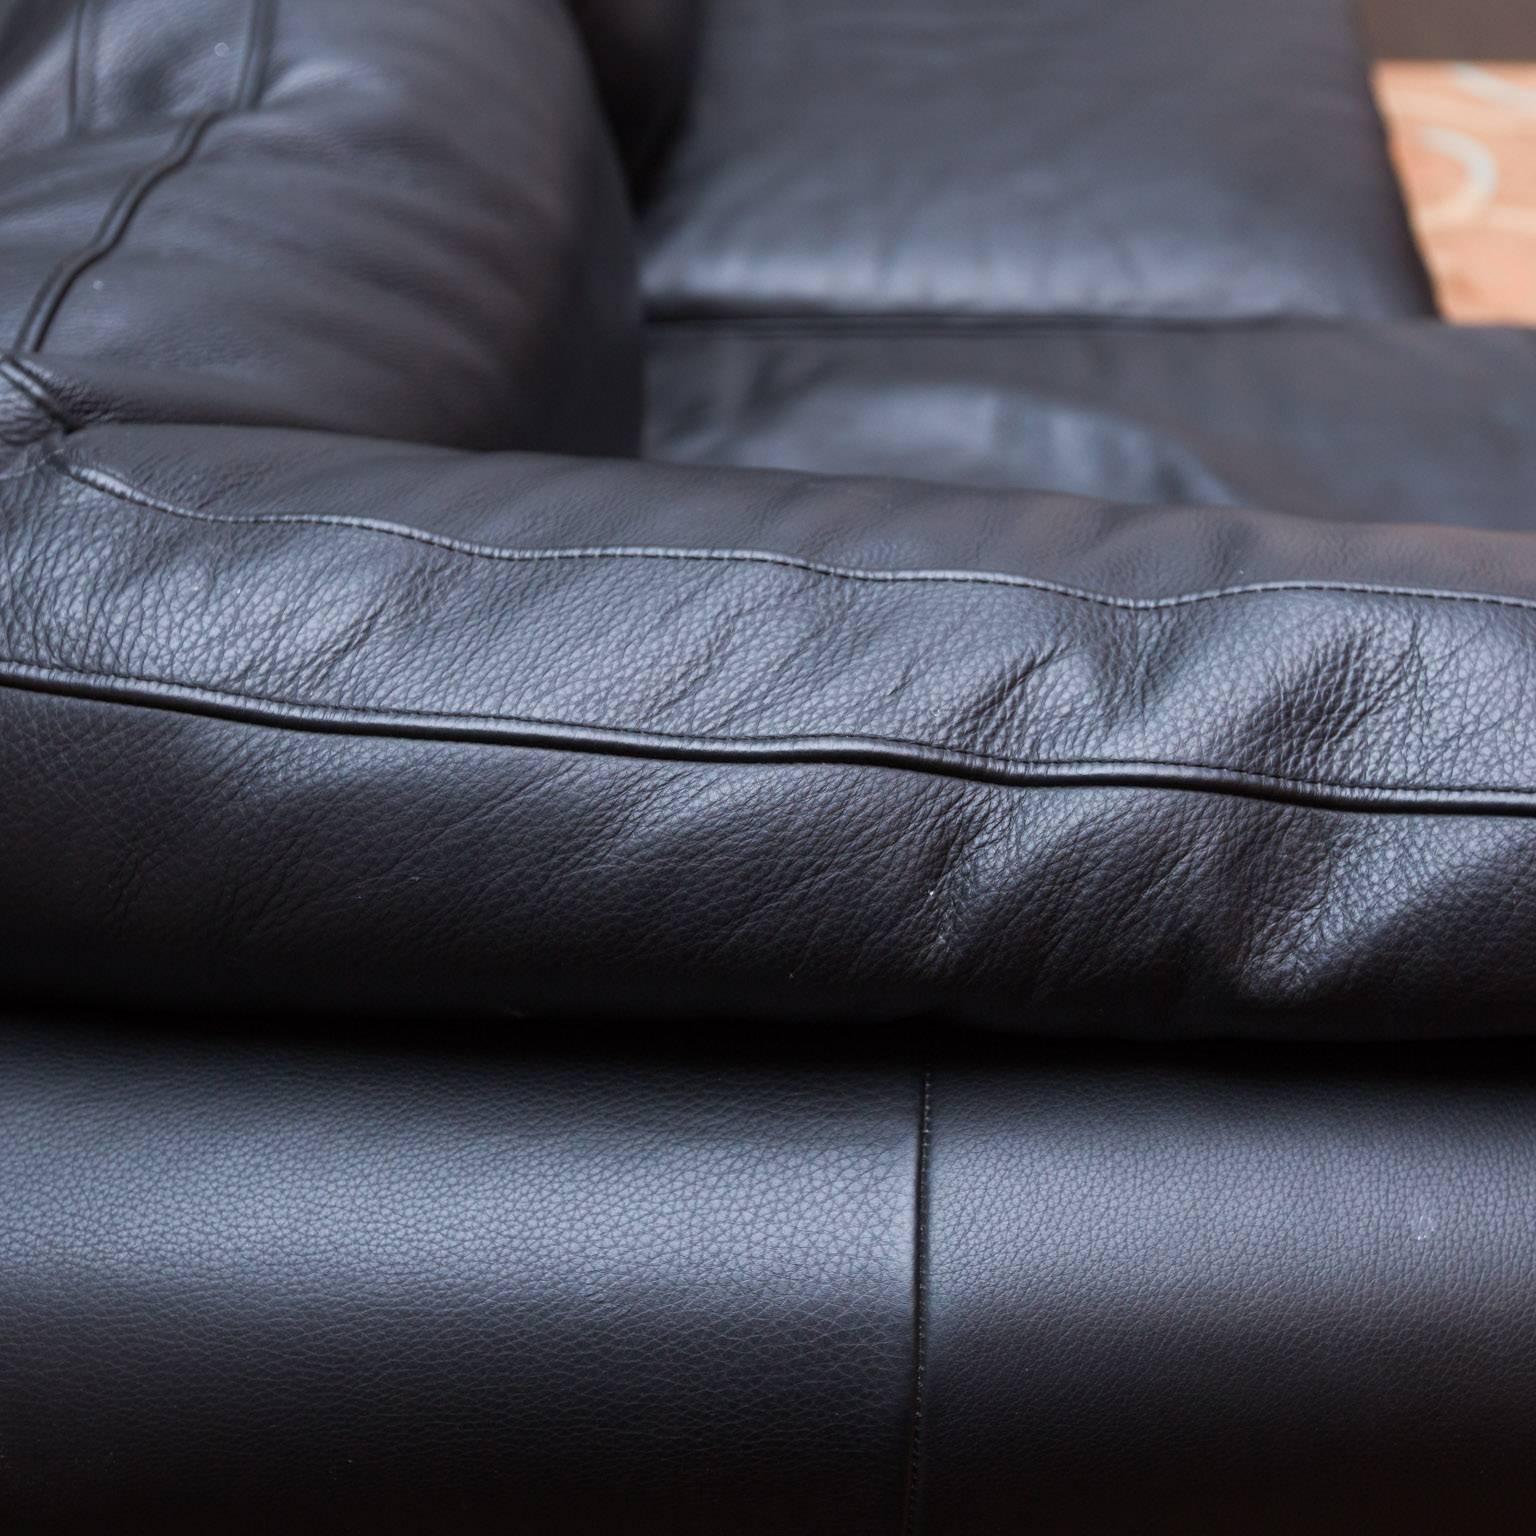 Super clean Italian leather sectional no longer available from Design Within Reach. Pillows are zippered in to prevent shifting, so they alwaya retain their shape.